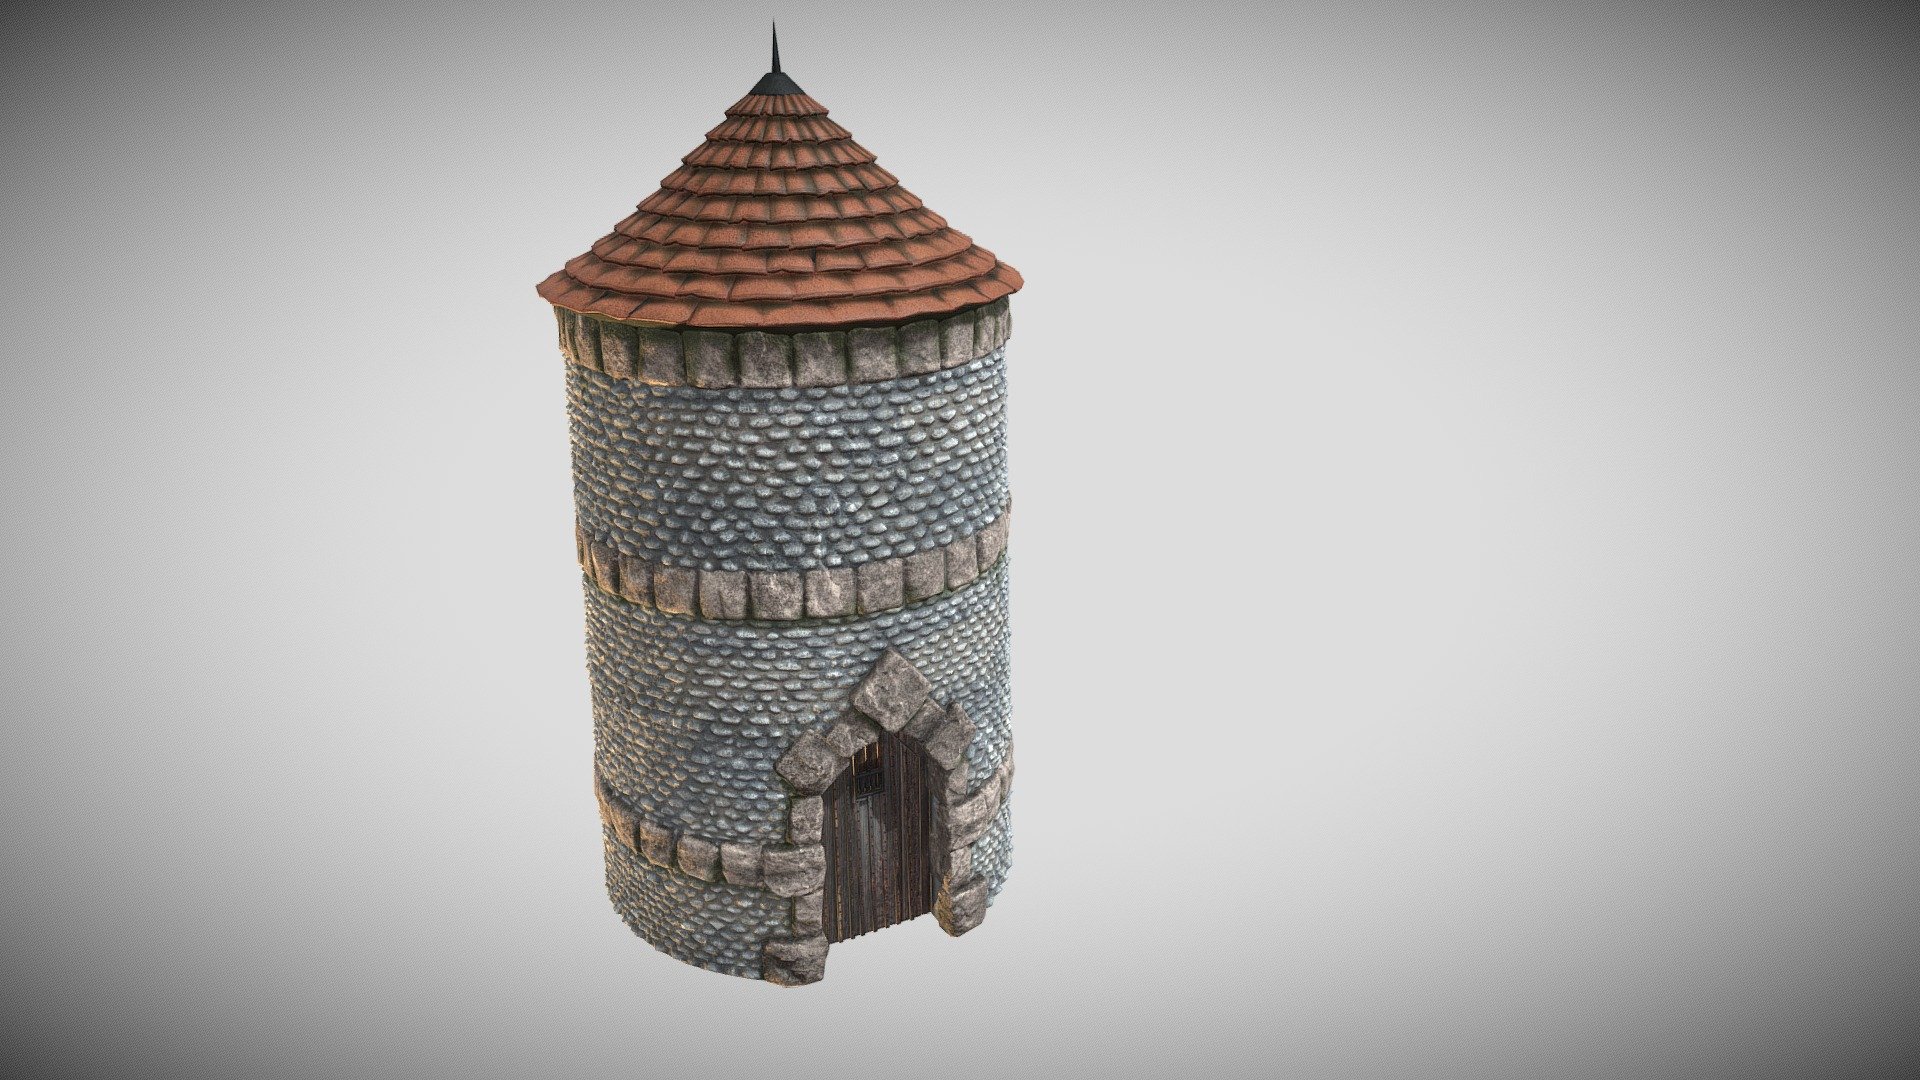 The Medieval Tower Stone Turret Low-Poly Game Asset is our newest 3D model for download. This game-ready asset is ideal for any project or game with mediaeval or fantasy themes.

High-quality 2K PBR photographic textures for the diffuse, normal, bump, and smoothness maps are included with the model, which gives the object more realistic features.

The Medieval Tower model has also been carefully optimised, with only 22177 faces and 14099 vertices in its low-polygon count. Because of this, it can be used in games or real-time applications without sacrificing visual quality.

In order for you to use the medieval stone tower model with your favourite 3D software, we also made care to export it in a variety of file formats, including blend (native), obj, fbx, stl, ply, and dae.

The Medieval Tower Turret Low-Poly Game Asset is a flexible and excellent 3D model that is prepared for usage in your games or 3D projects 3d model